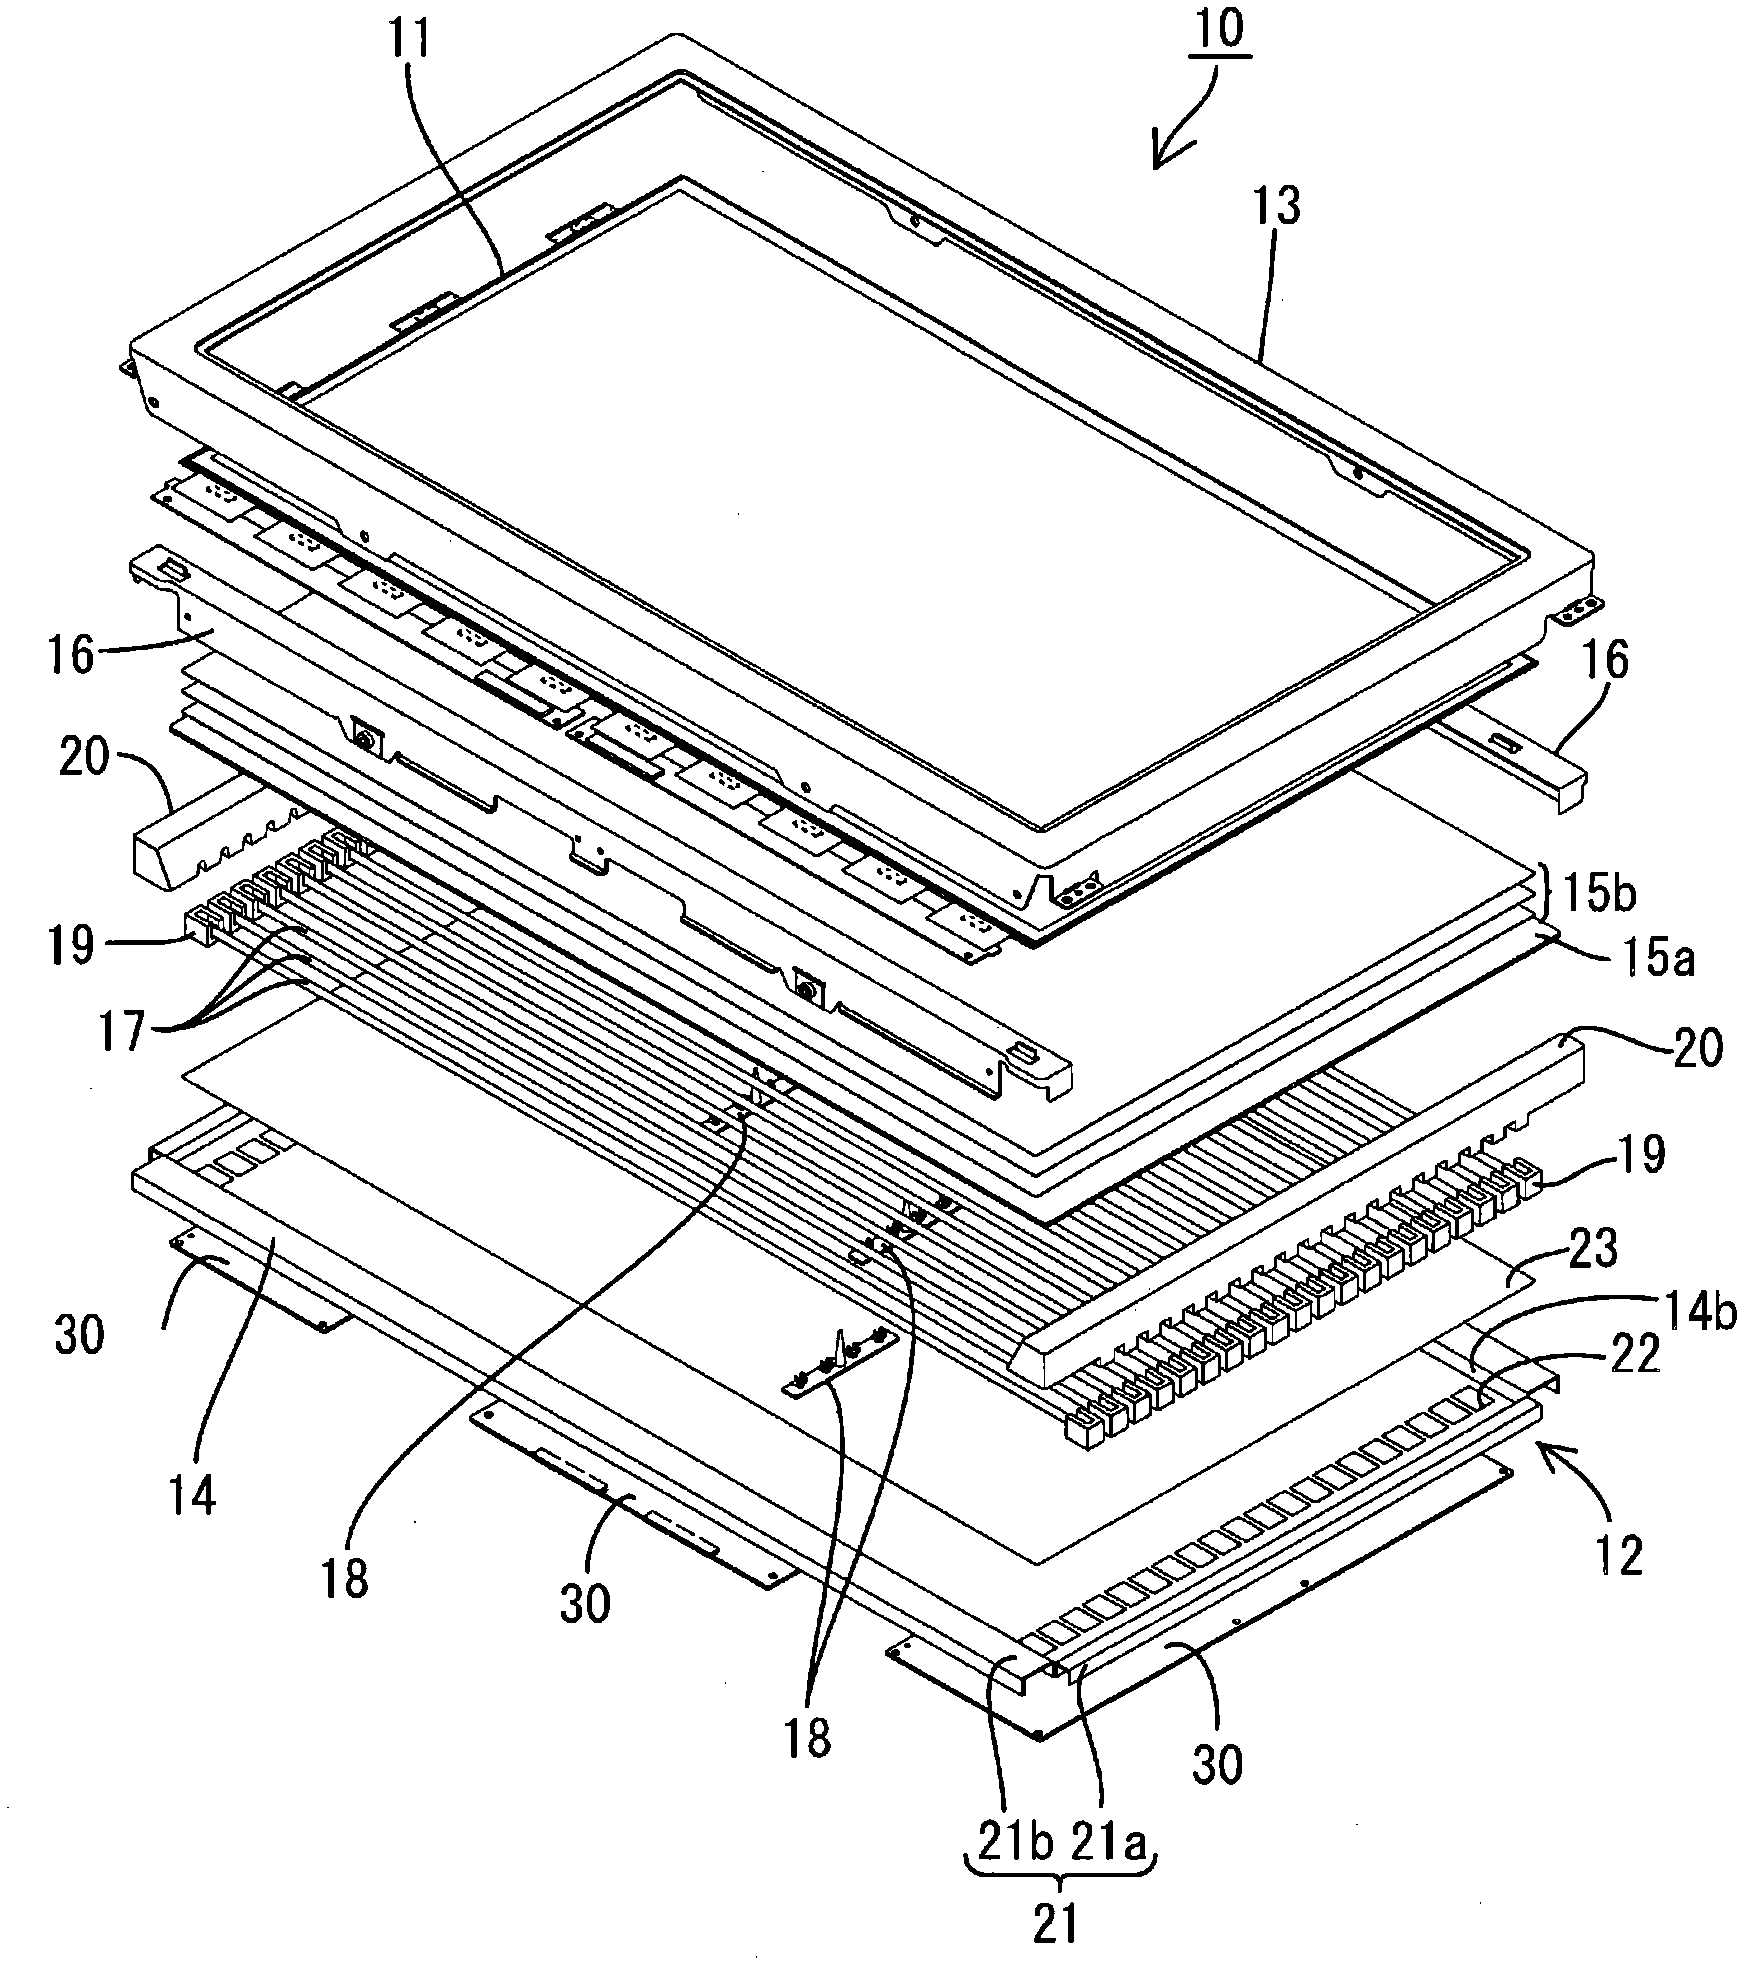 Display device and television receiver